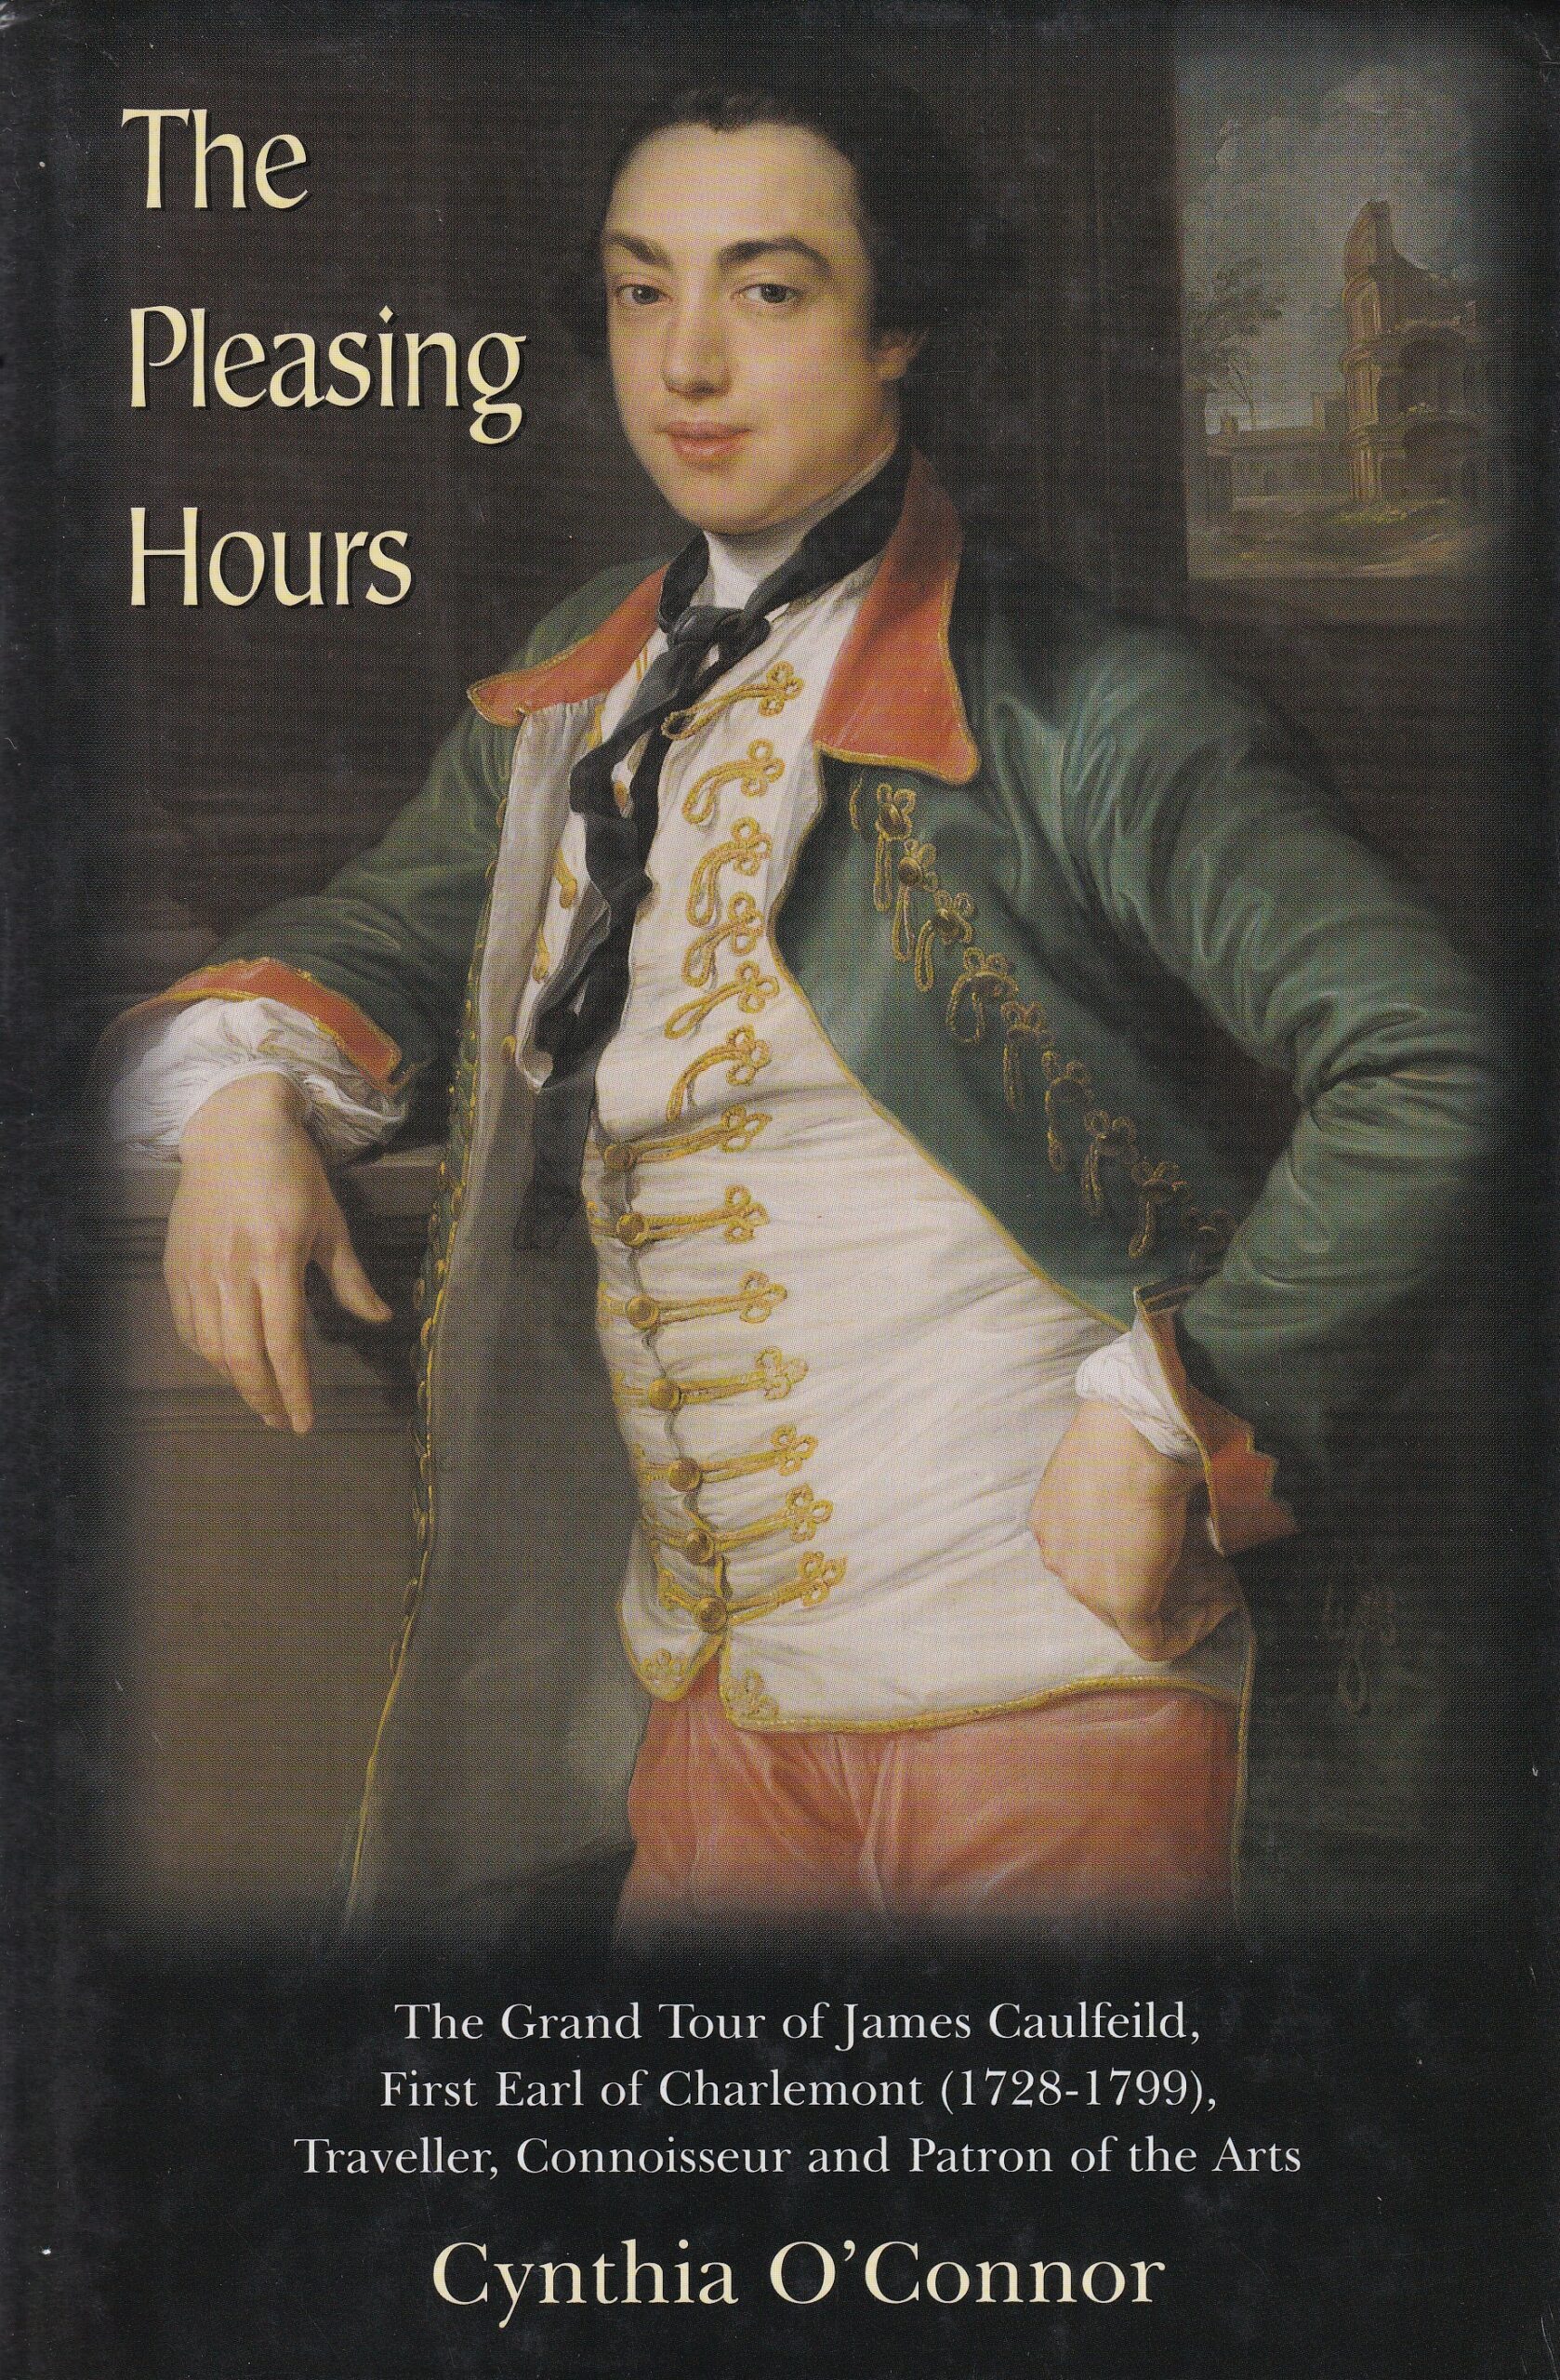 The Pleasing Hours: The Grand Tour of James Caulfield, First Earl of Charlemont (1728-1799), Traveller, Connoisseur and Patron of the Arts | Cynthia O'Connor | Charlie Byrne's